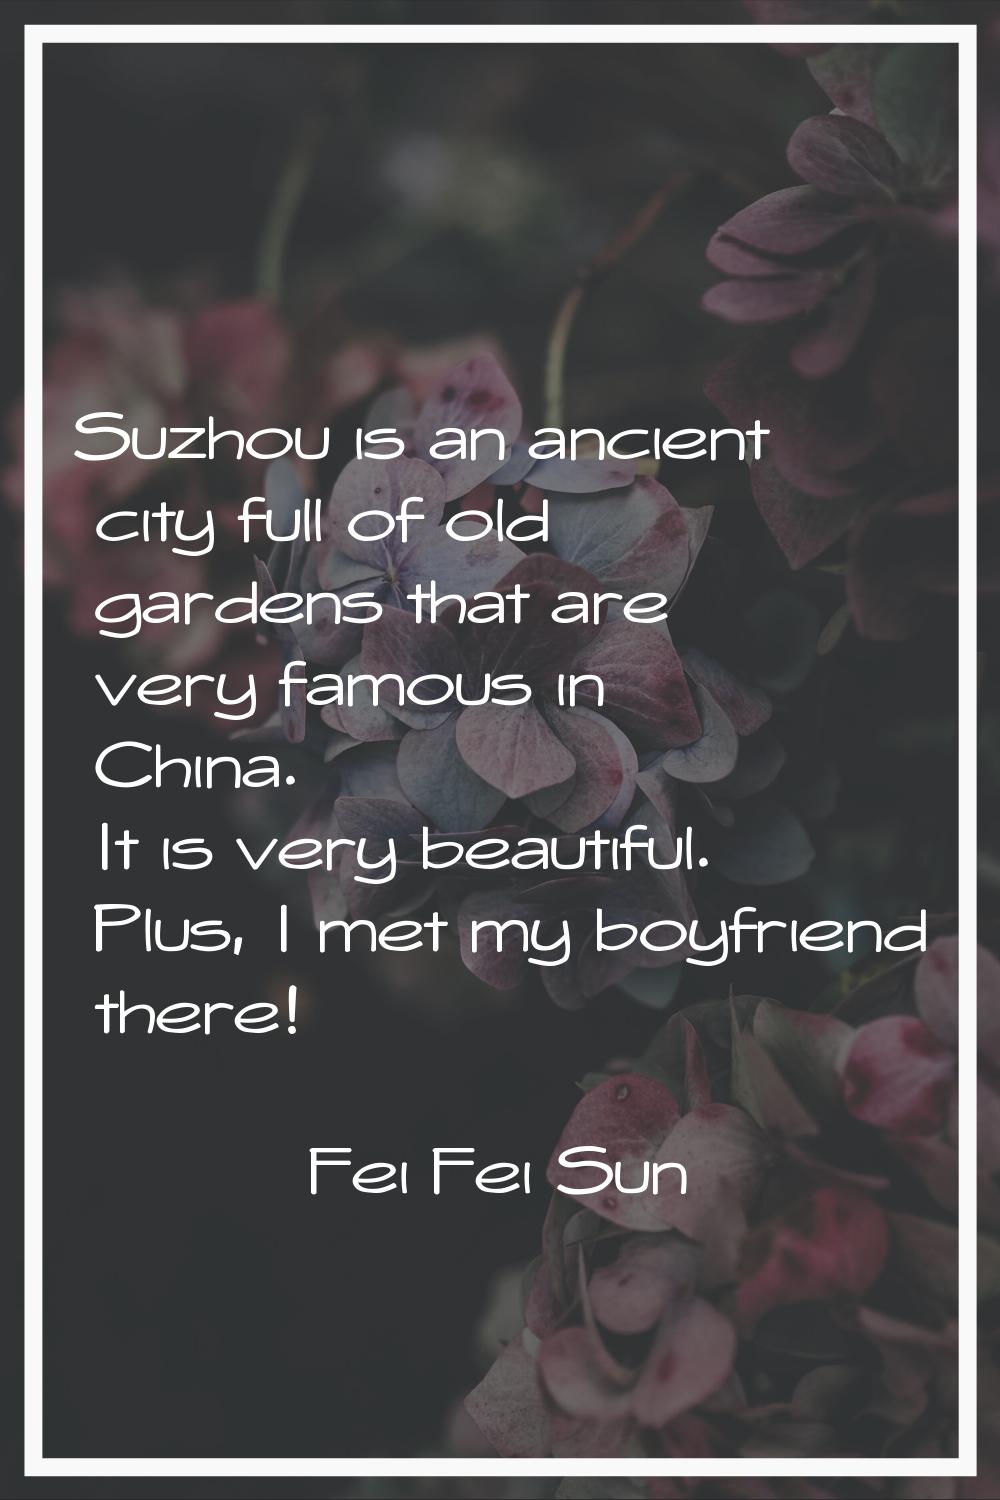 Suzhou is an ancient city full of old gardens that are very famous in China. It is very beautiful. 